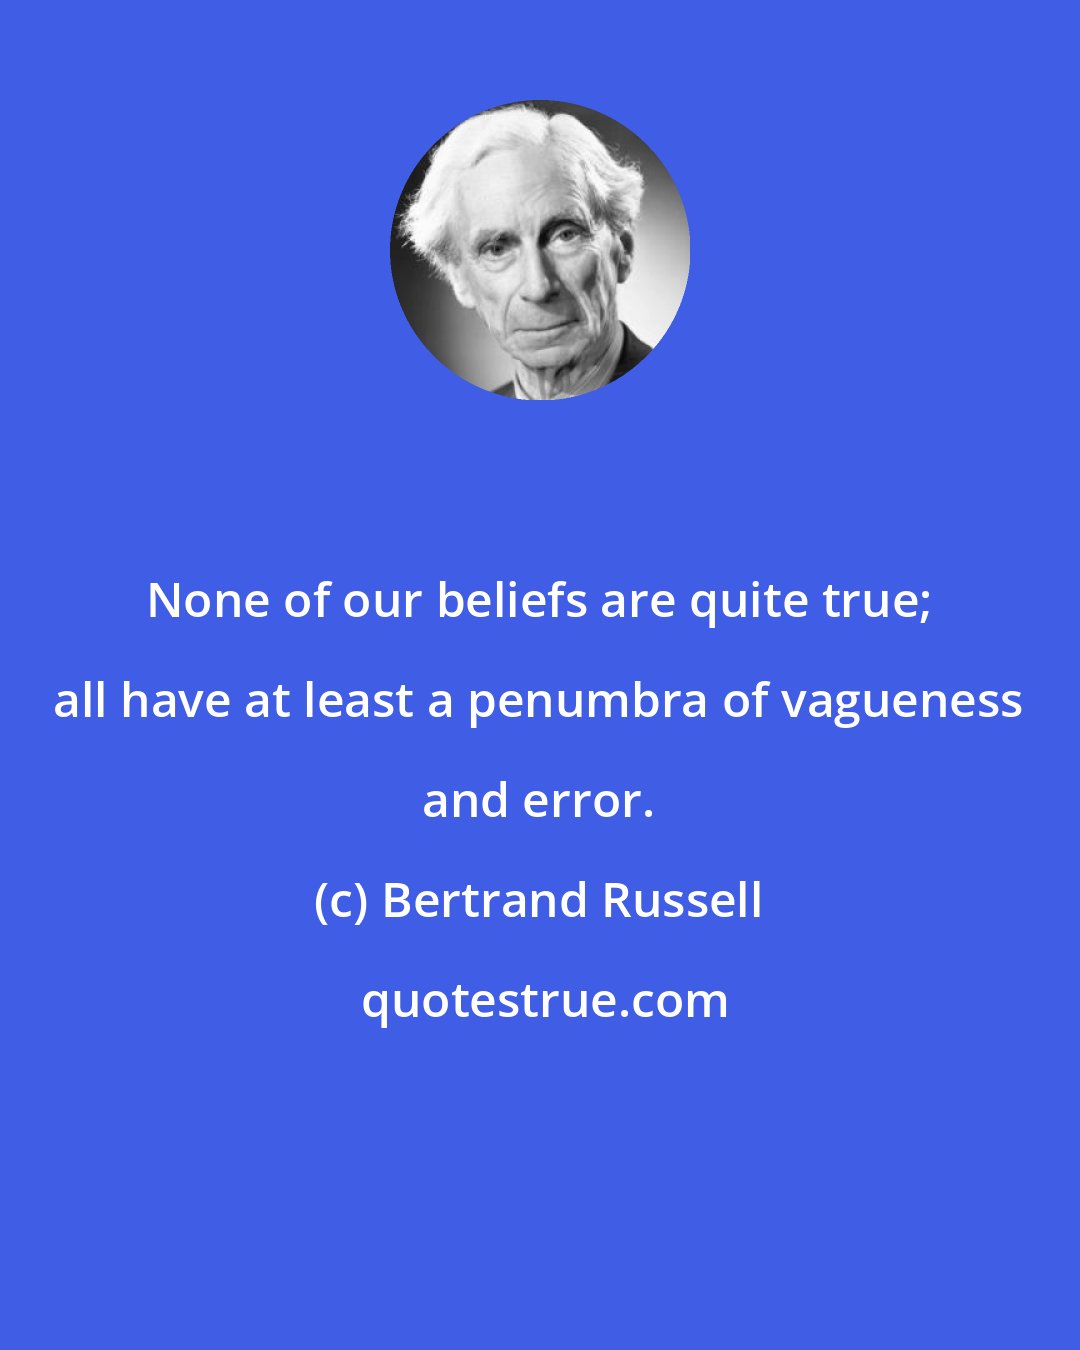 Bertrand Russell: None of our beliefs are quite true; all have at least a penumbra of vagueness and error.